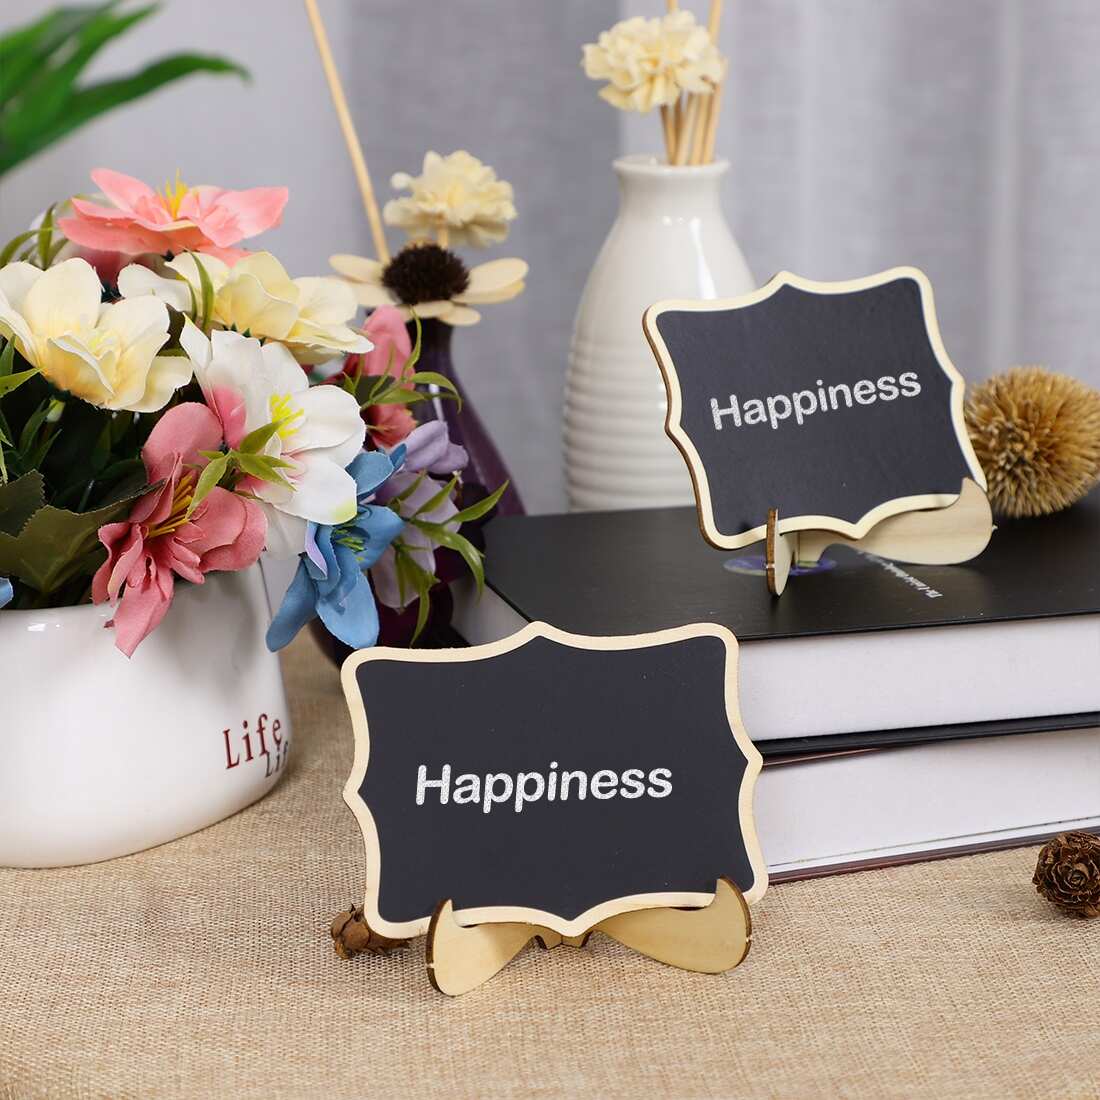 20pcs Wood Mini Chalkboard Tags w Base Stands for Message Board Signs - Black,Wood Color